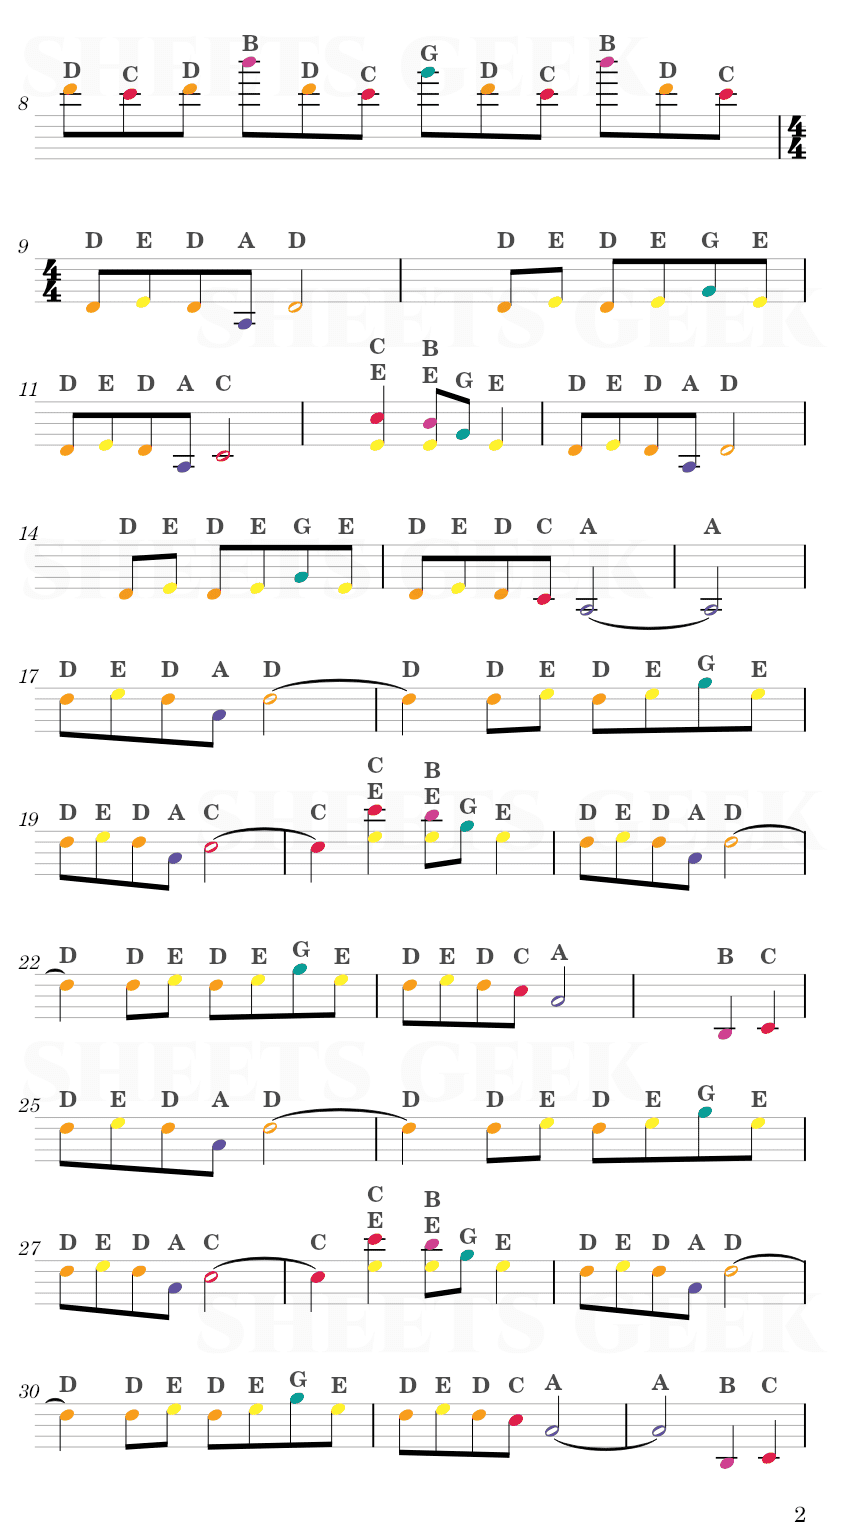 Merry Christmas, Mr. Lawrence - Ryuichi Sakamoto (Forbidden Colours) Easy Sheet Music Free for piano, keyboard, flute, violin, sax, cello page 2